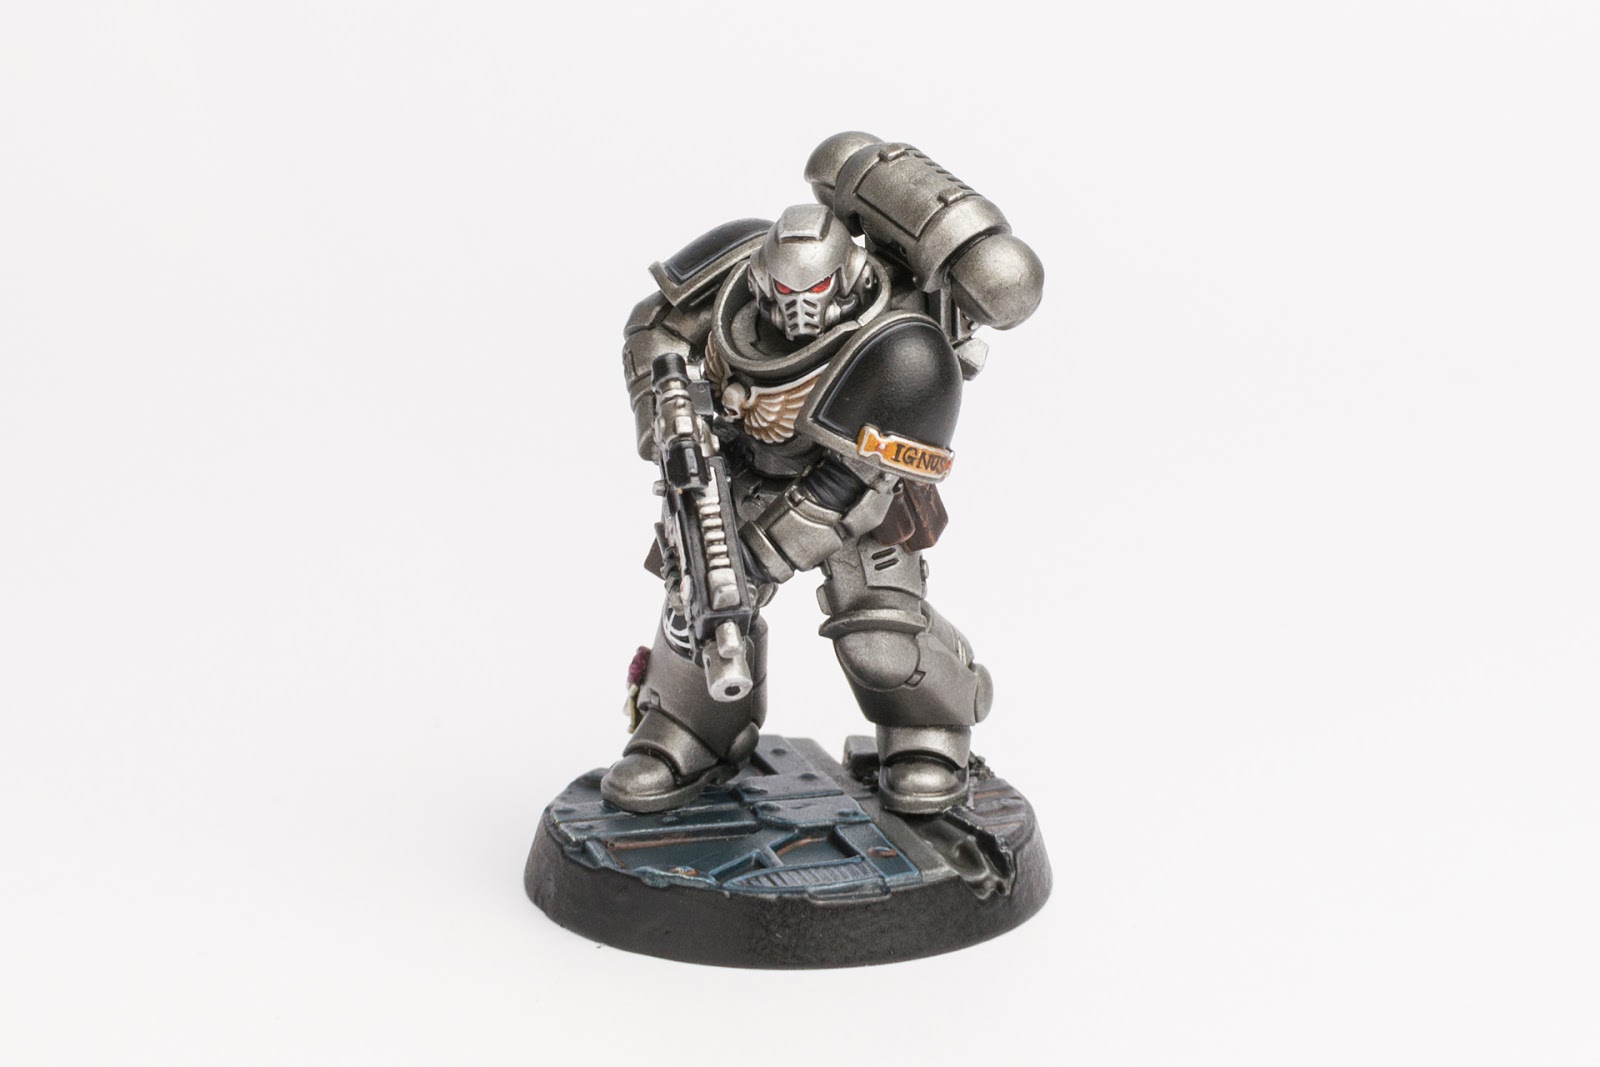 Silver Skulls Primaris Space Marines painting guide - finished model